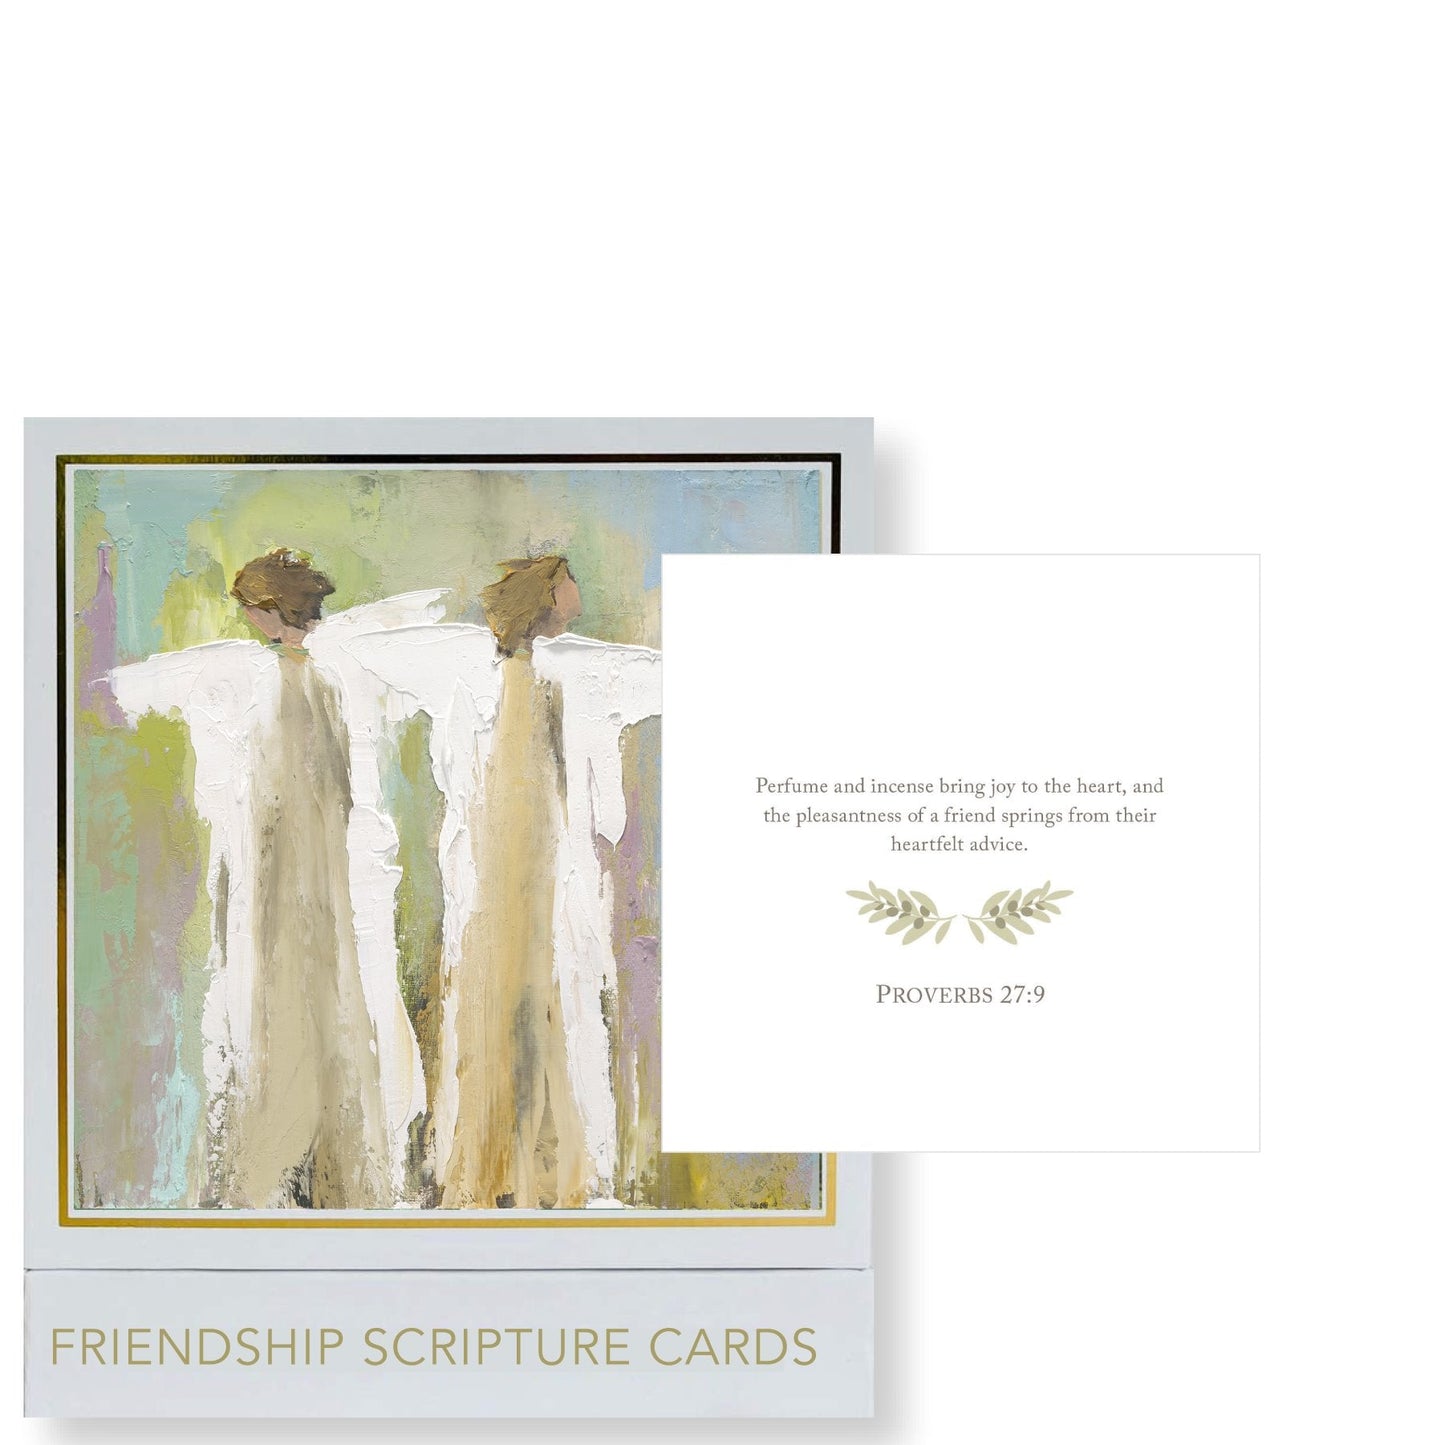 A Friendship Scripture Card with a painting of two women holding hands by Anne Neilson.